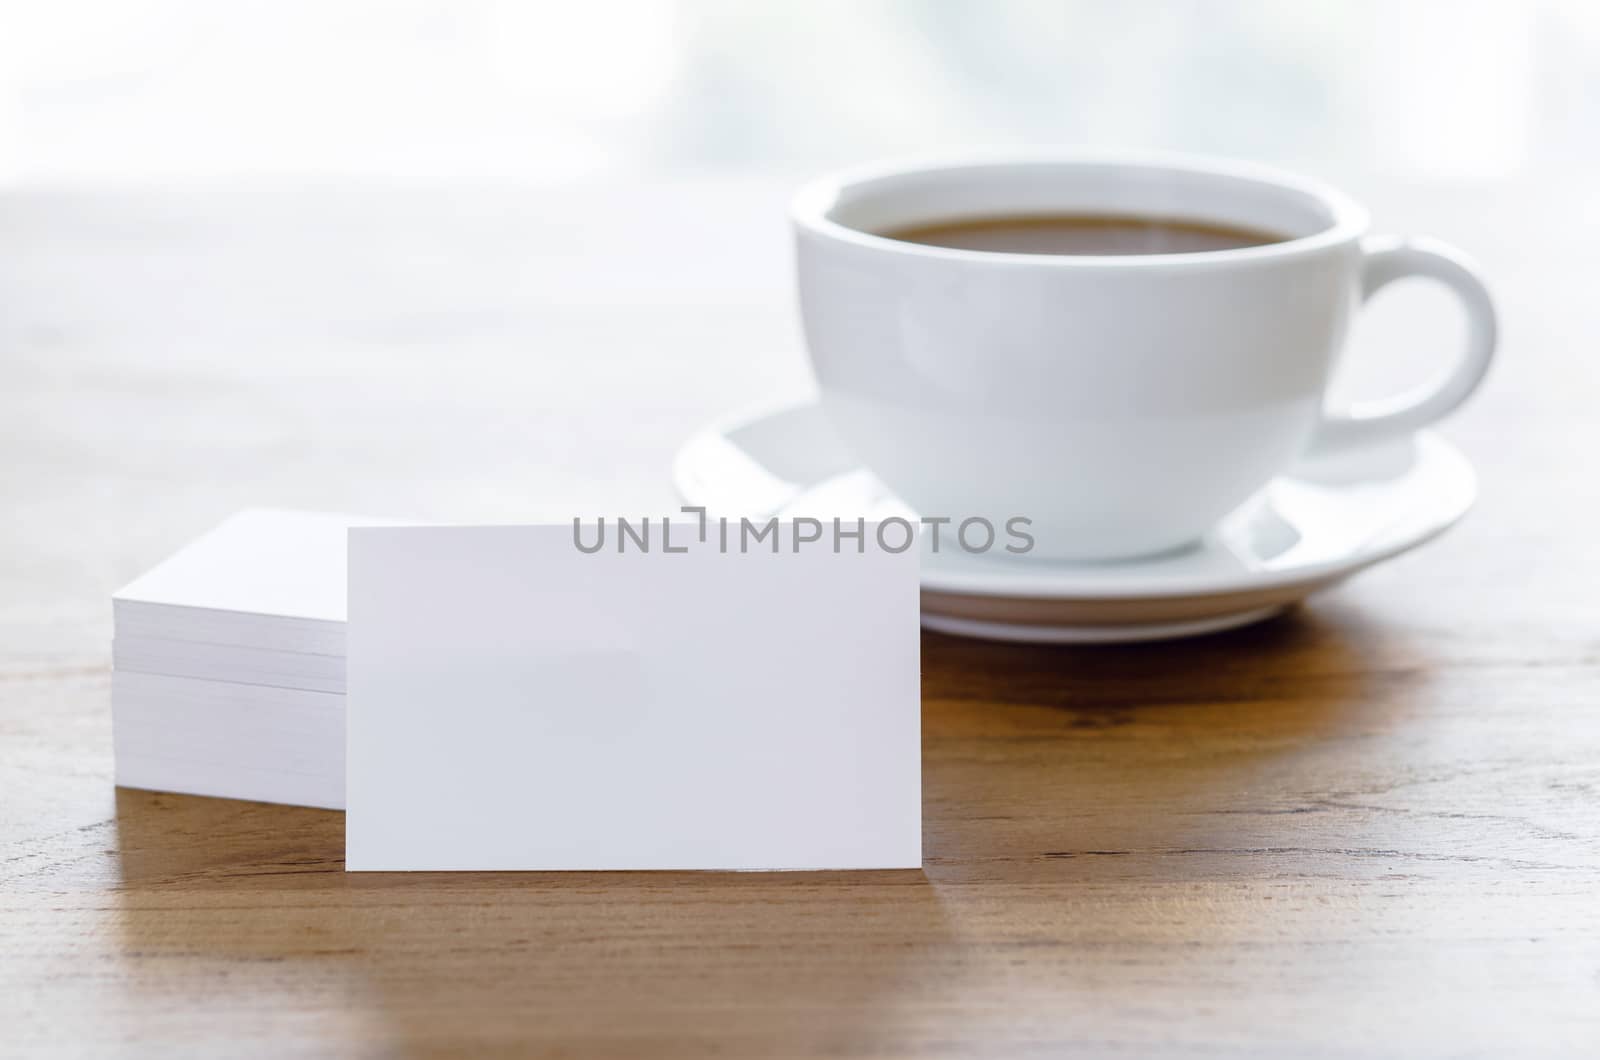 Blank business cards and cup of coffee on wooden table. Corporate stationary branding mock up.